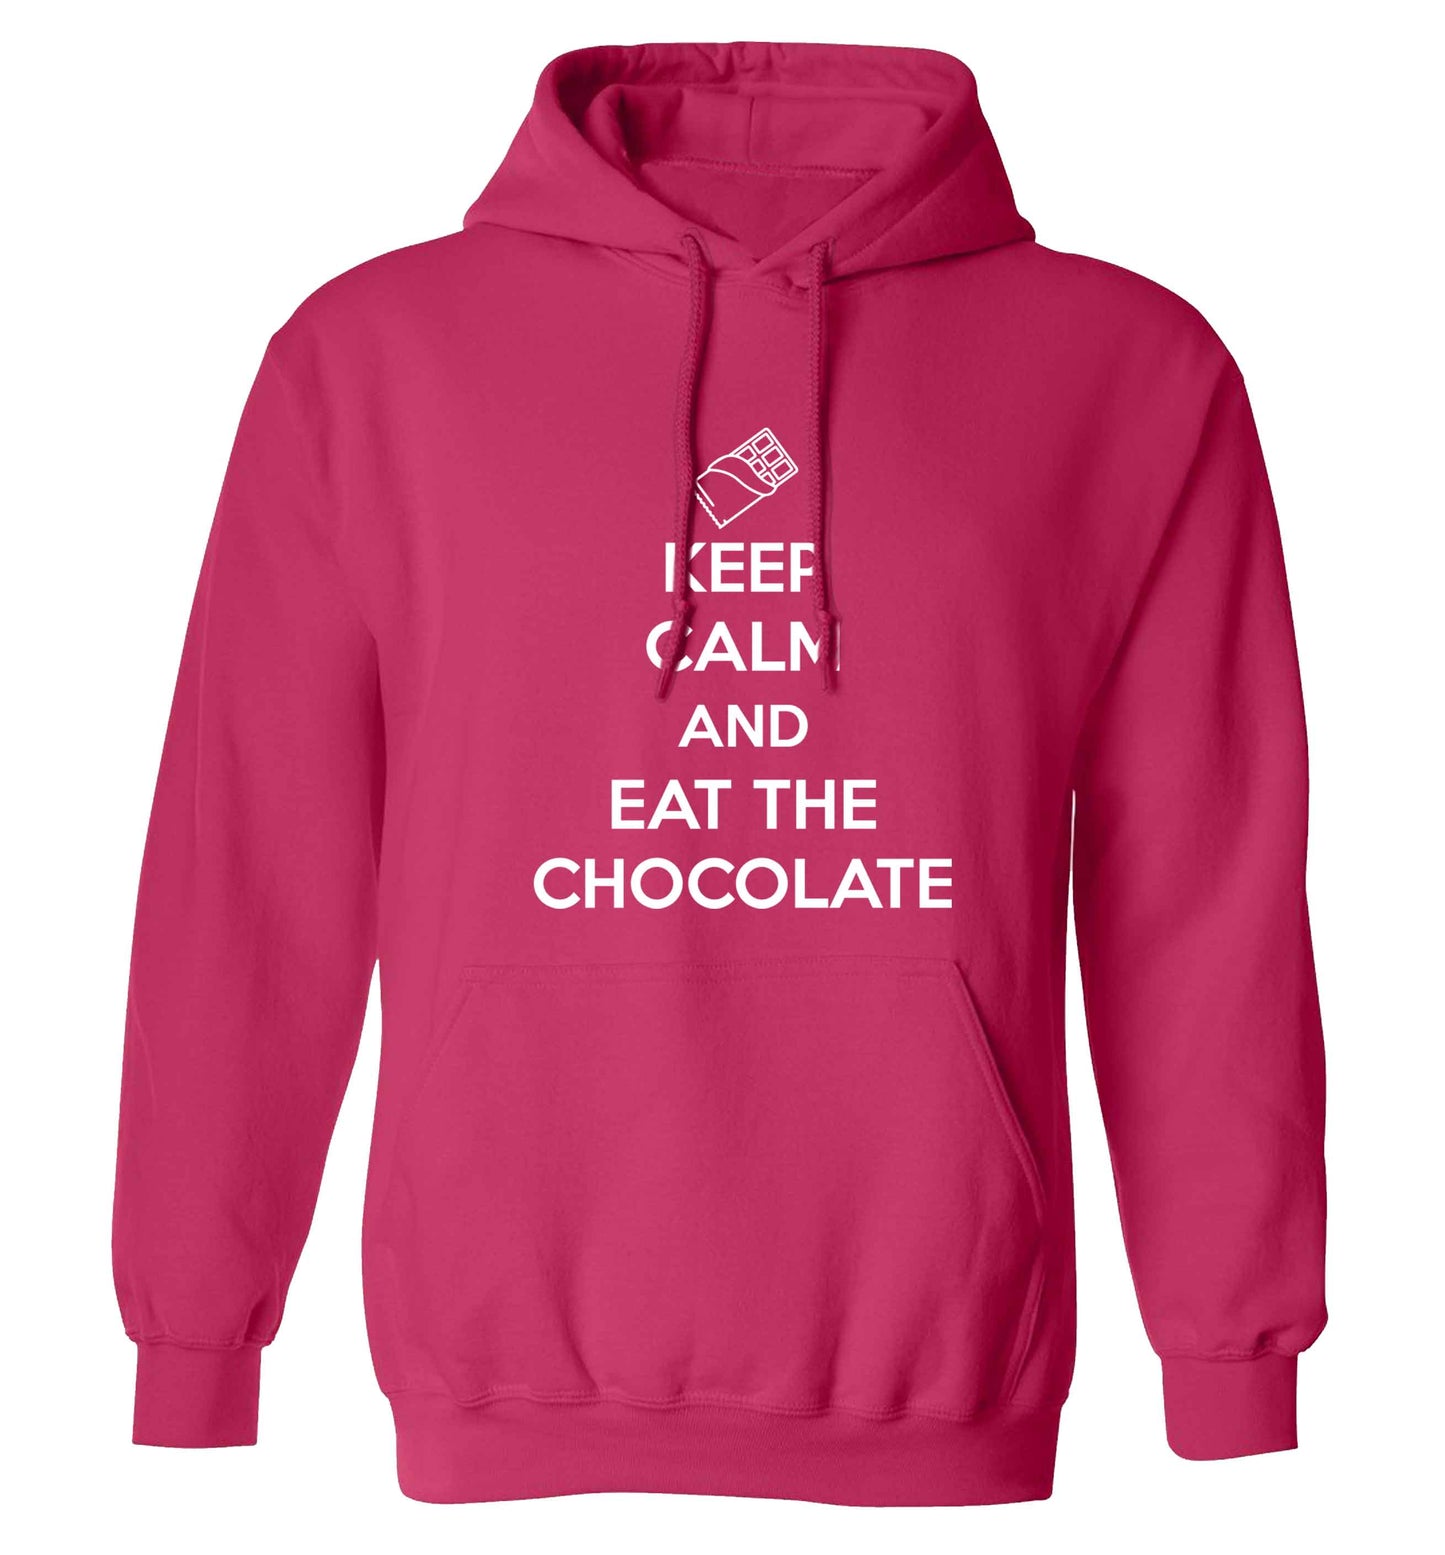 funny gift for a chocaholic! Keep calm and eat the chocolate adults unisex pink hoodie 2XL